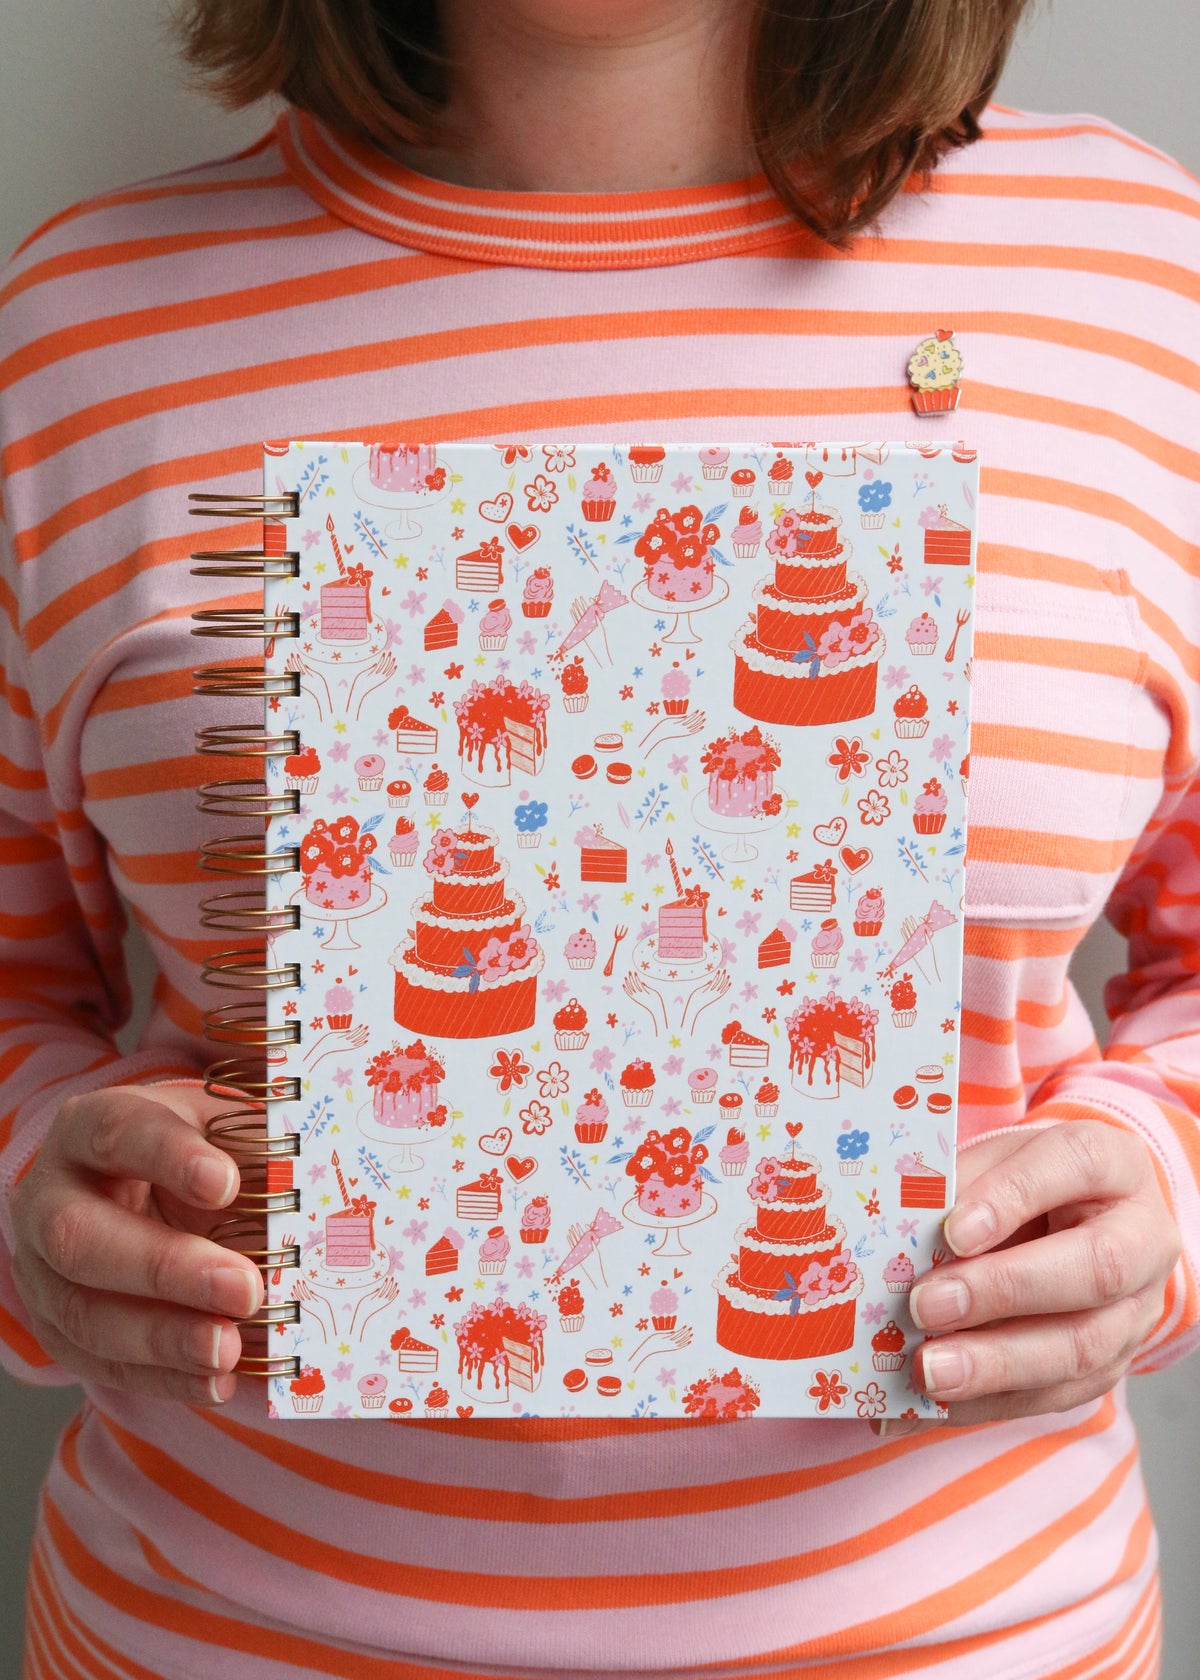 Illustrated Notebook Featuring Cake & Cupcakes with Sweater & Pin